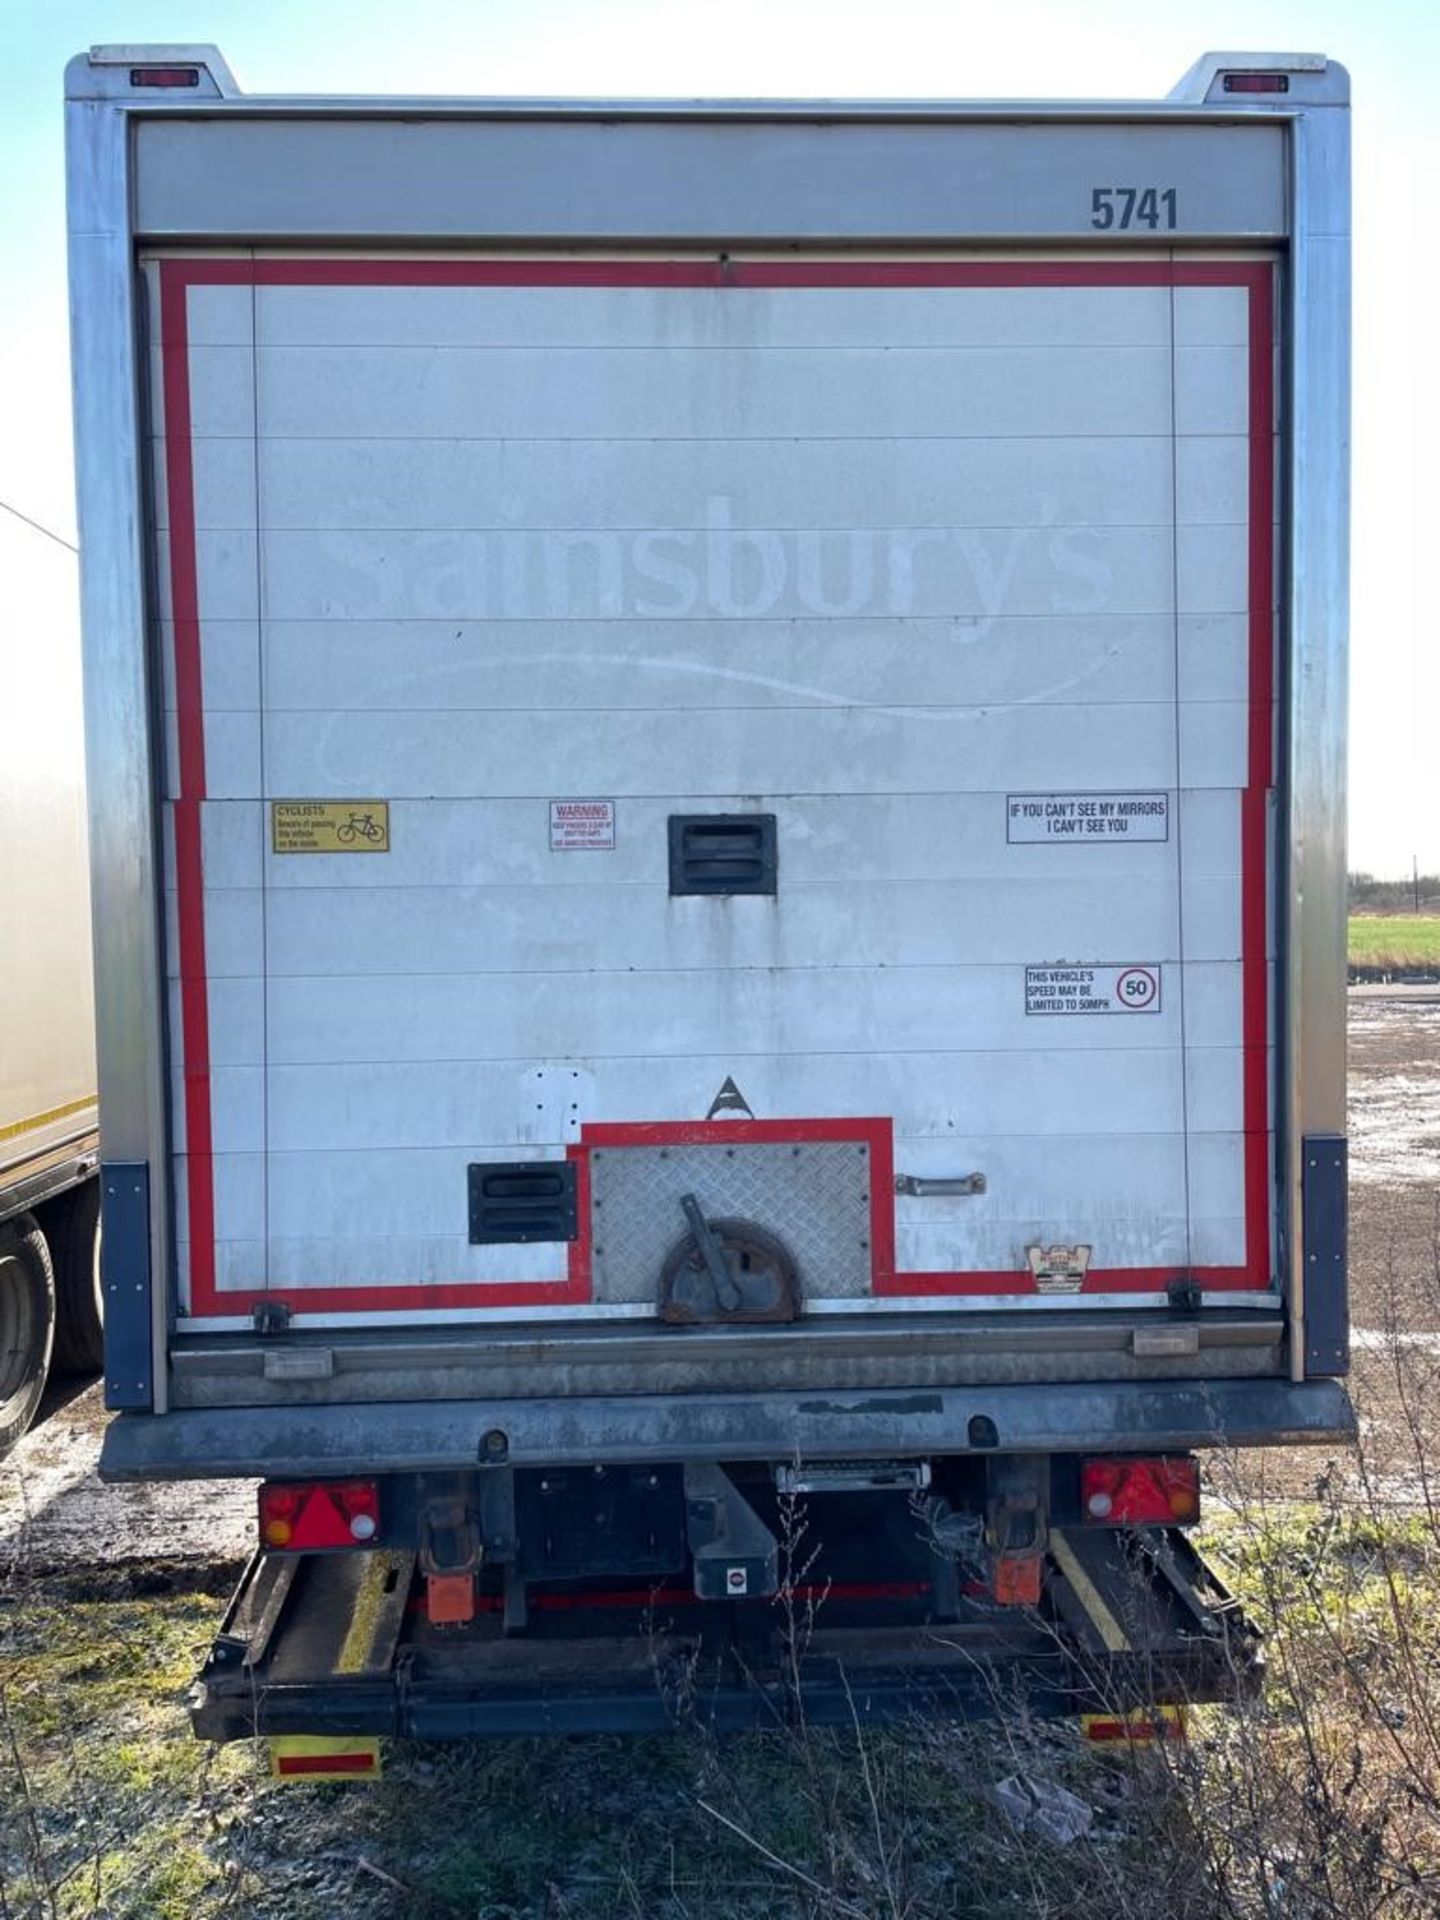 2015 Montracon 13.6m TriAxle Refrigerated Multi-Temp Trailer - Image 11 of 13